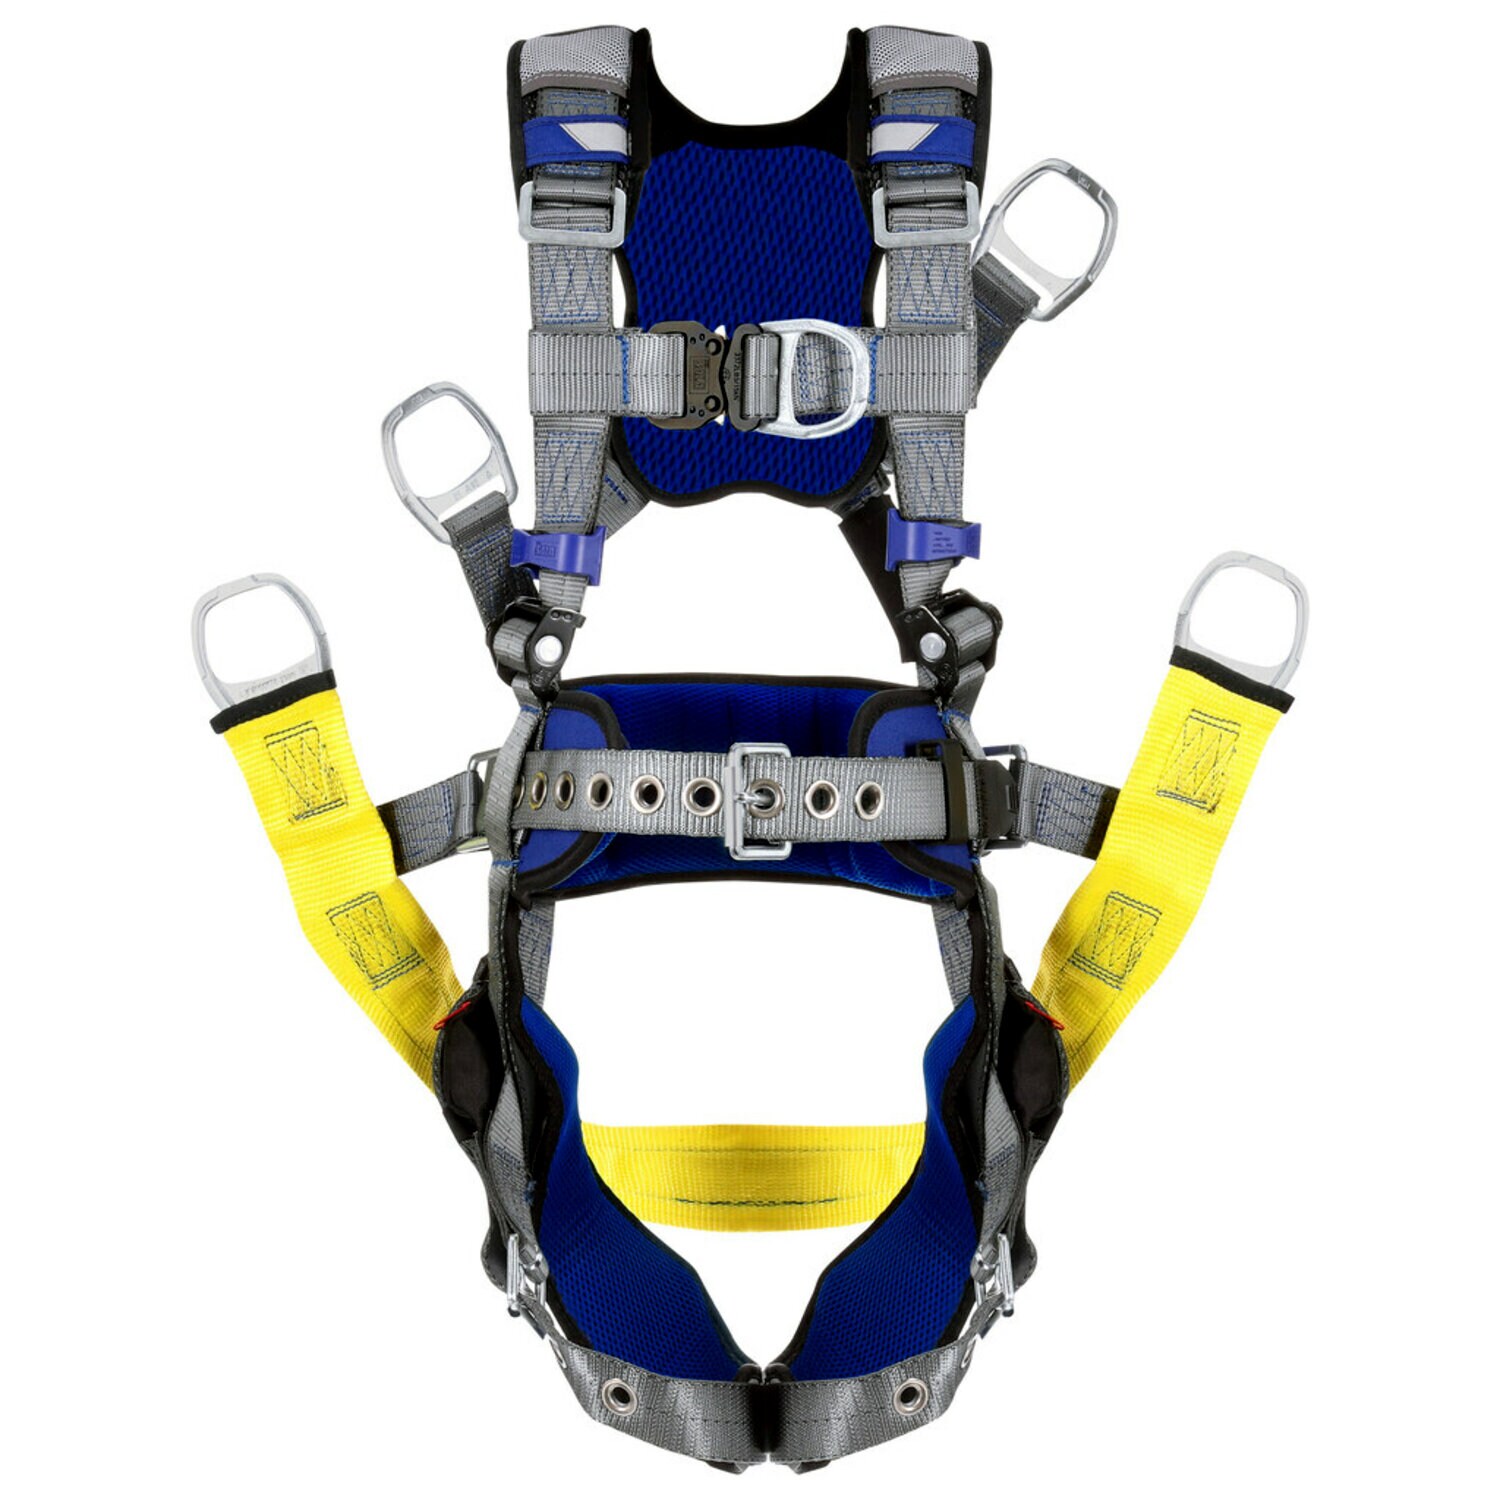 7012817796 - 3M DBI-SALA ExoFit X200 Comfort Tower Climbing/Suspension Safety Harness with Back D-ring Extension 1402059, X-Large